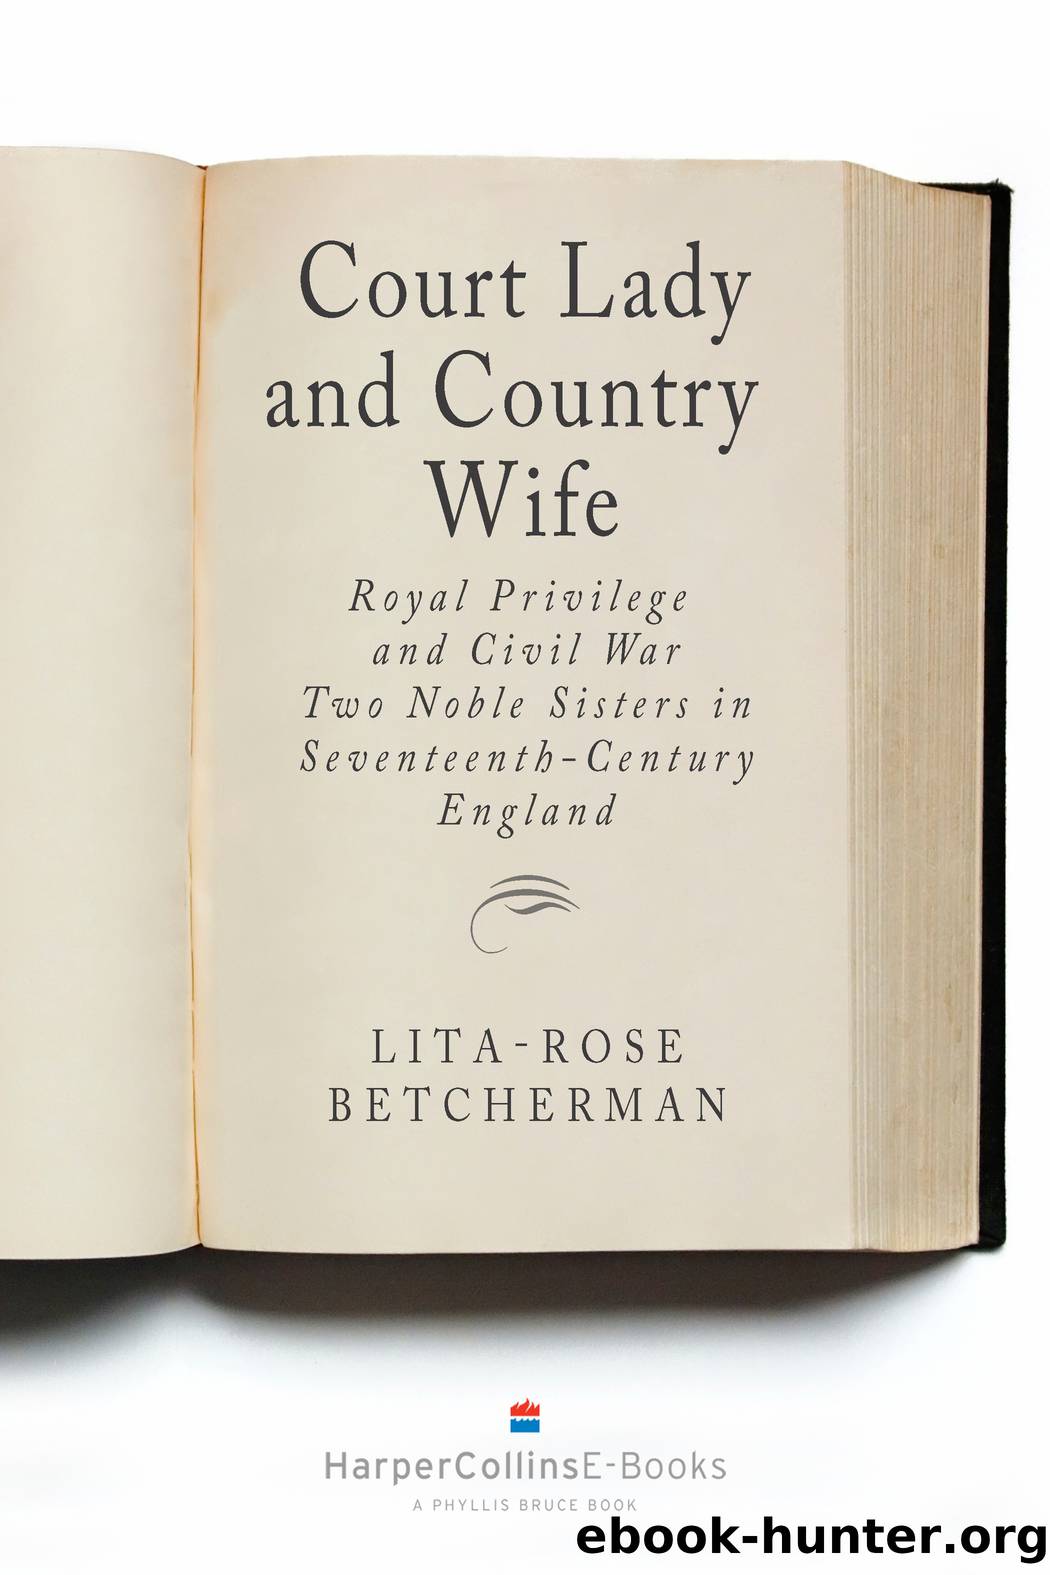 Court Lady and Country Wife by Lita-Rose Betcherman